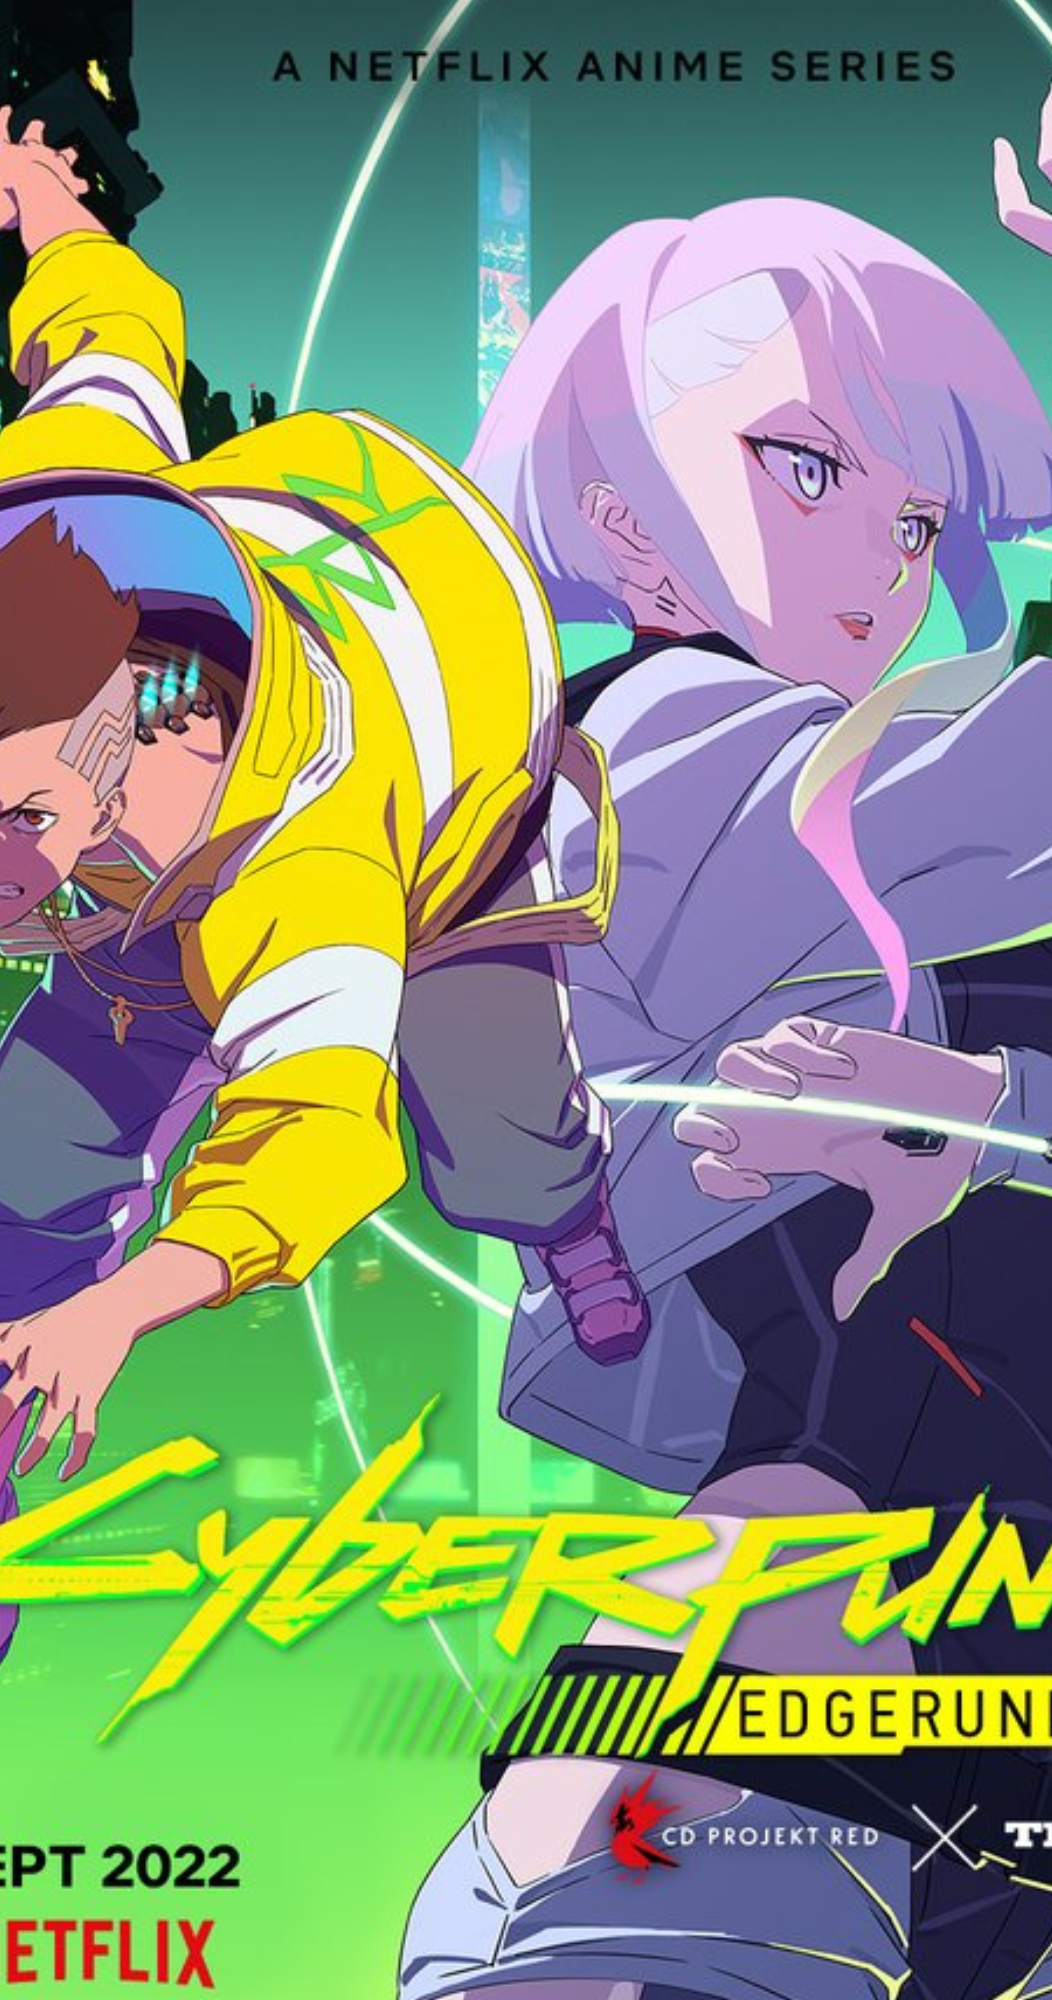 Cyberpunk Edgerunners Voted as the Best New Anime of 2022